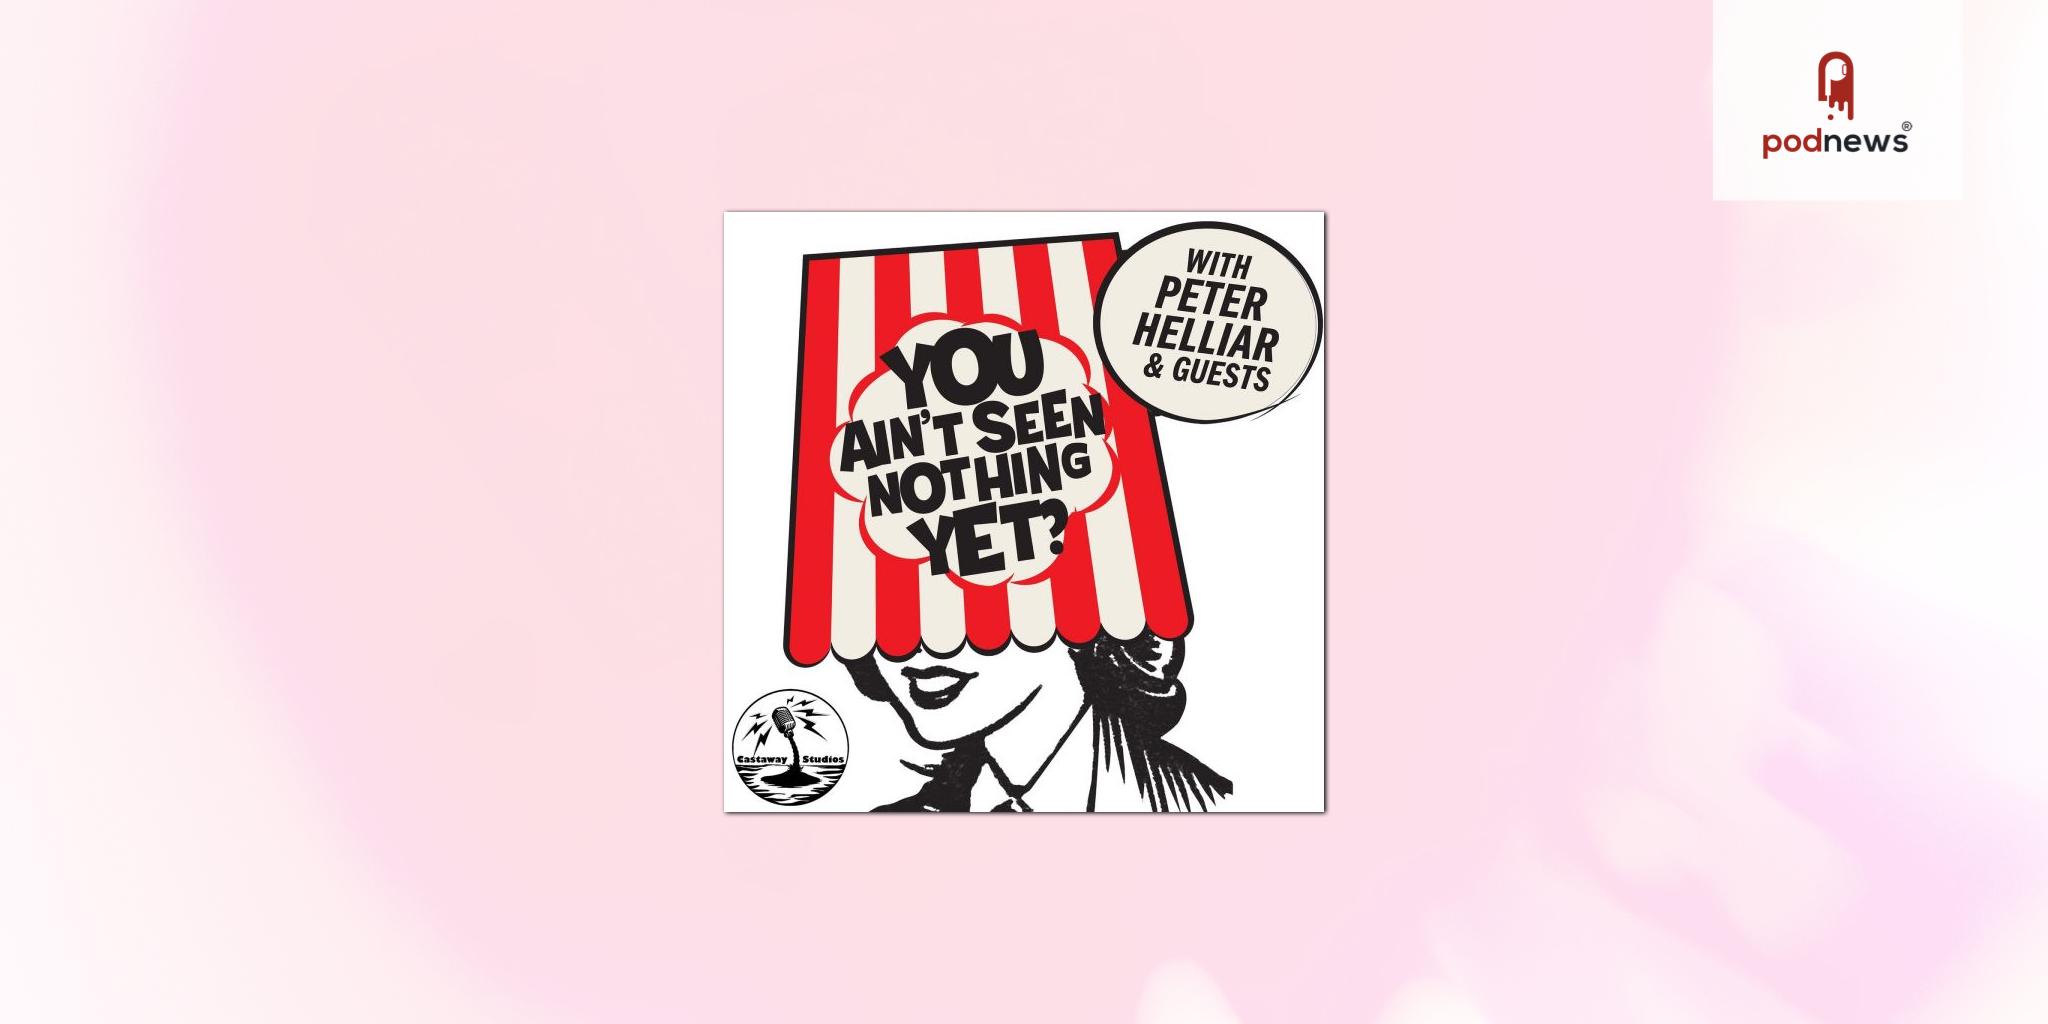 Pete Helliar's You Ain't Seen Nothin' Yet joins ARN's iHeartPodcast Network Australia